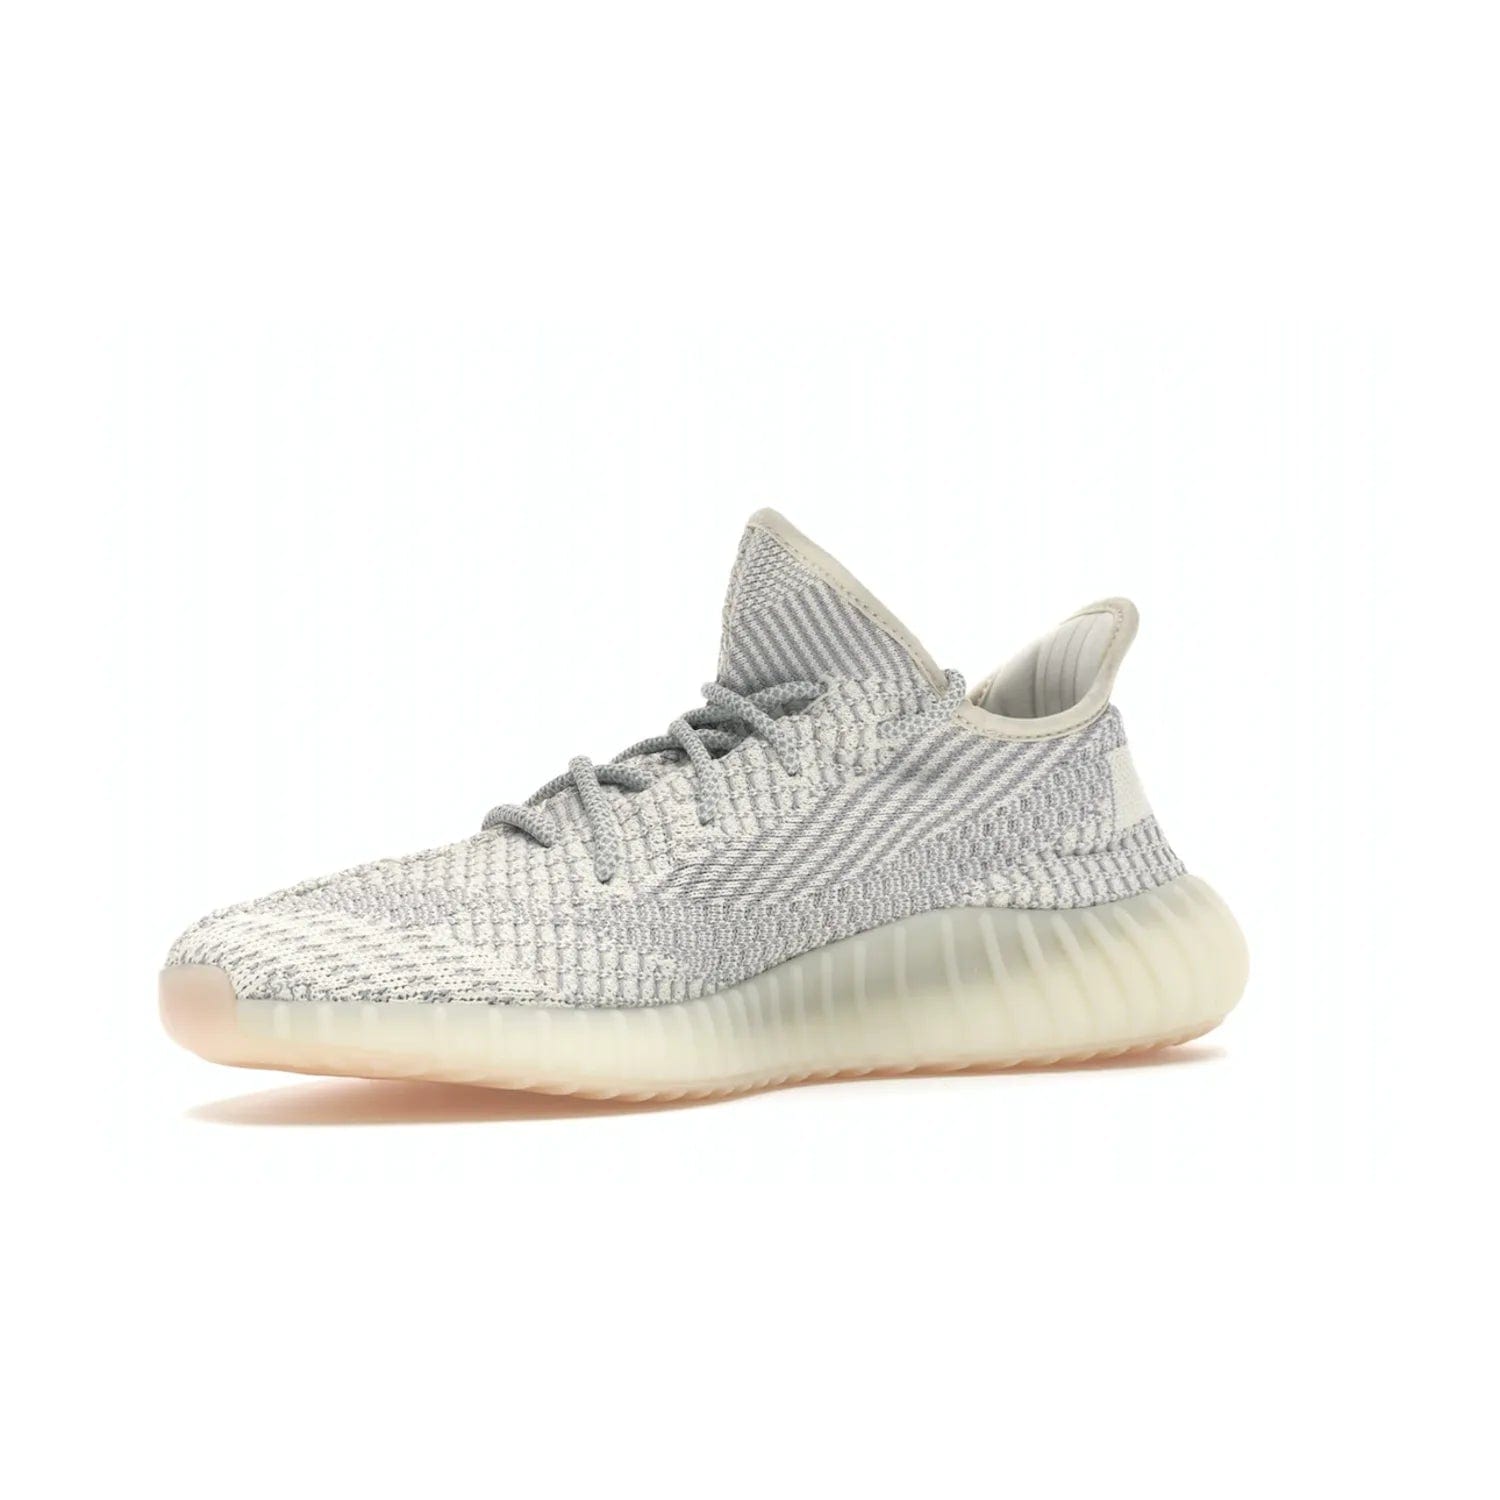 adidas Yeezy Boost 350 V2 Lundmark (Non Reflective) - Image 16 - Only at www.BallersClubKickz.com - Shop the exclusive adidas Yeezy Boost 350 V2 Lundmark with a subtle summer color, mesh upper, white-to-cream transitional midsole, light tan outsole, and pink middle stripe. Comfort and style come together in this perfect summer 350 V2. Released on July 11, 2019.